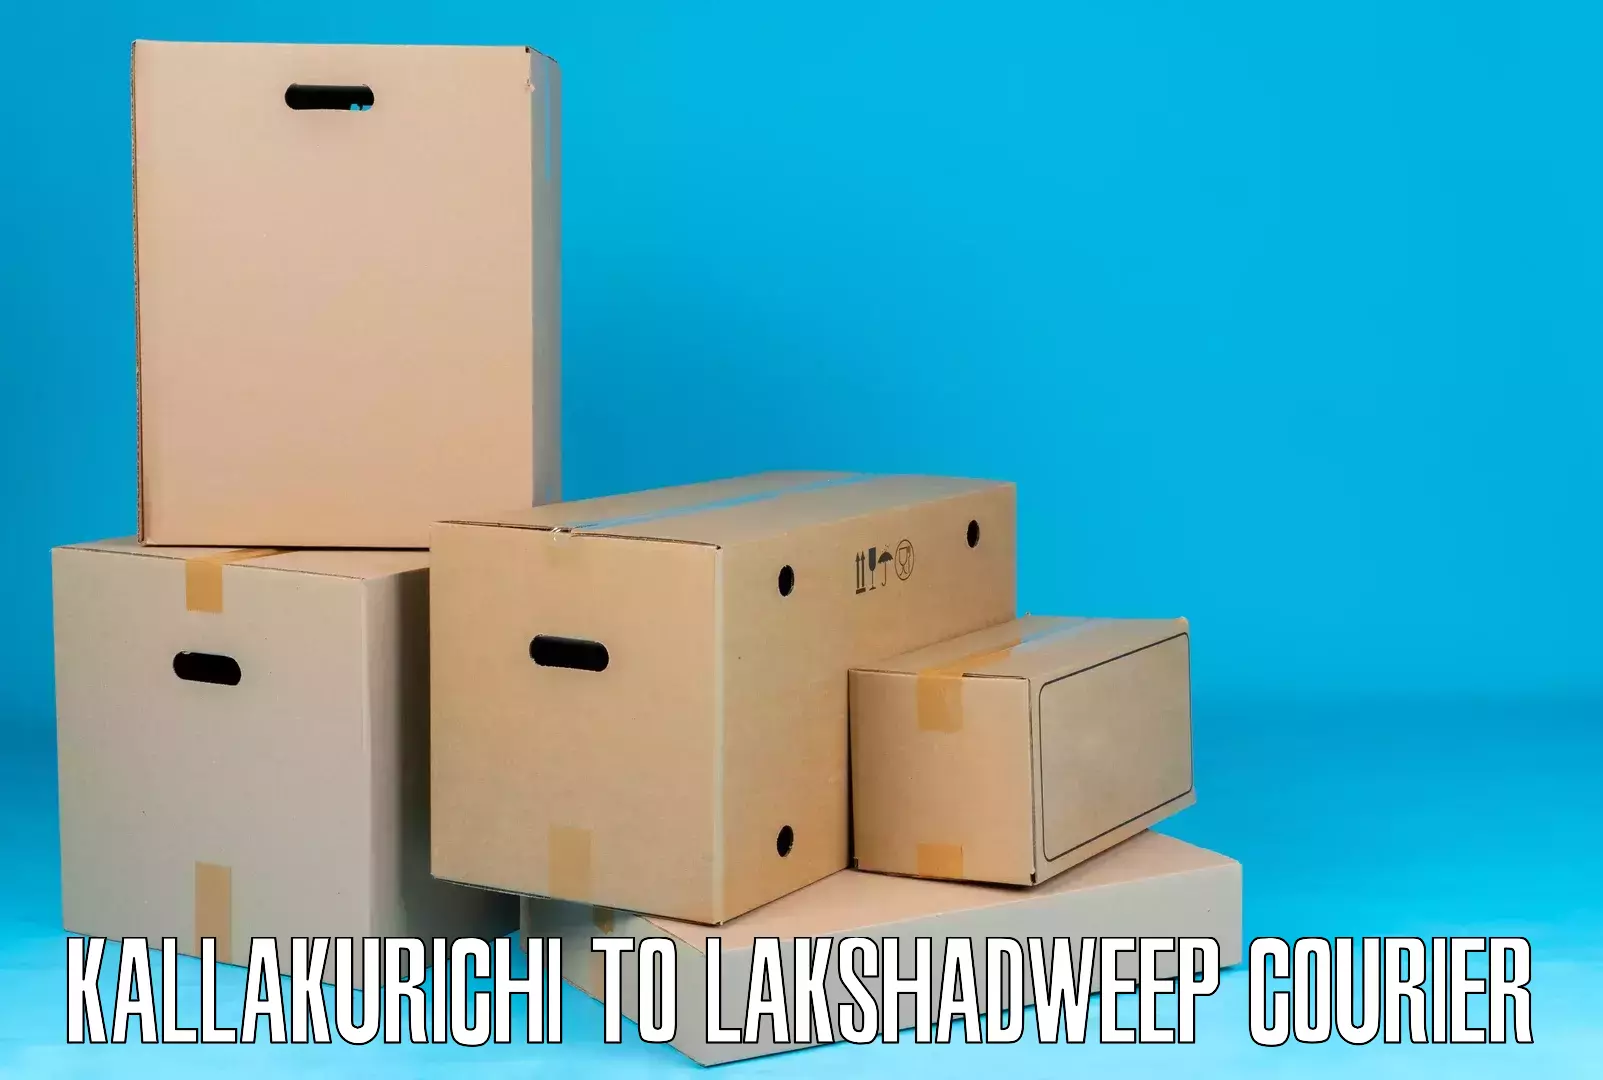 Cost-effective courier solutions Kallakurichi to Lakshadweep